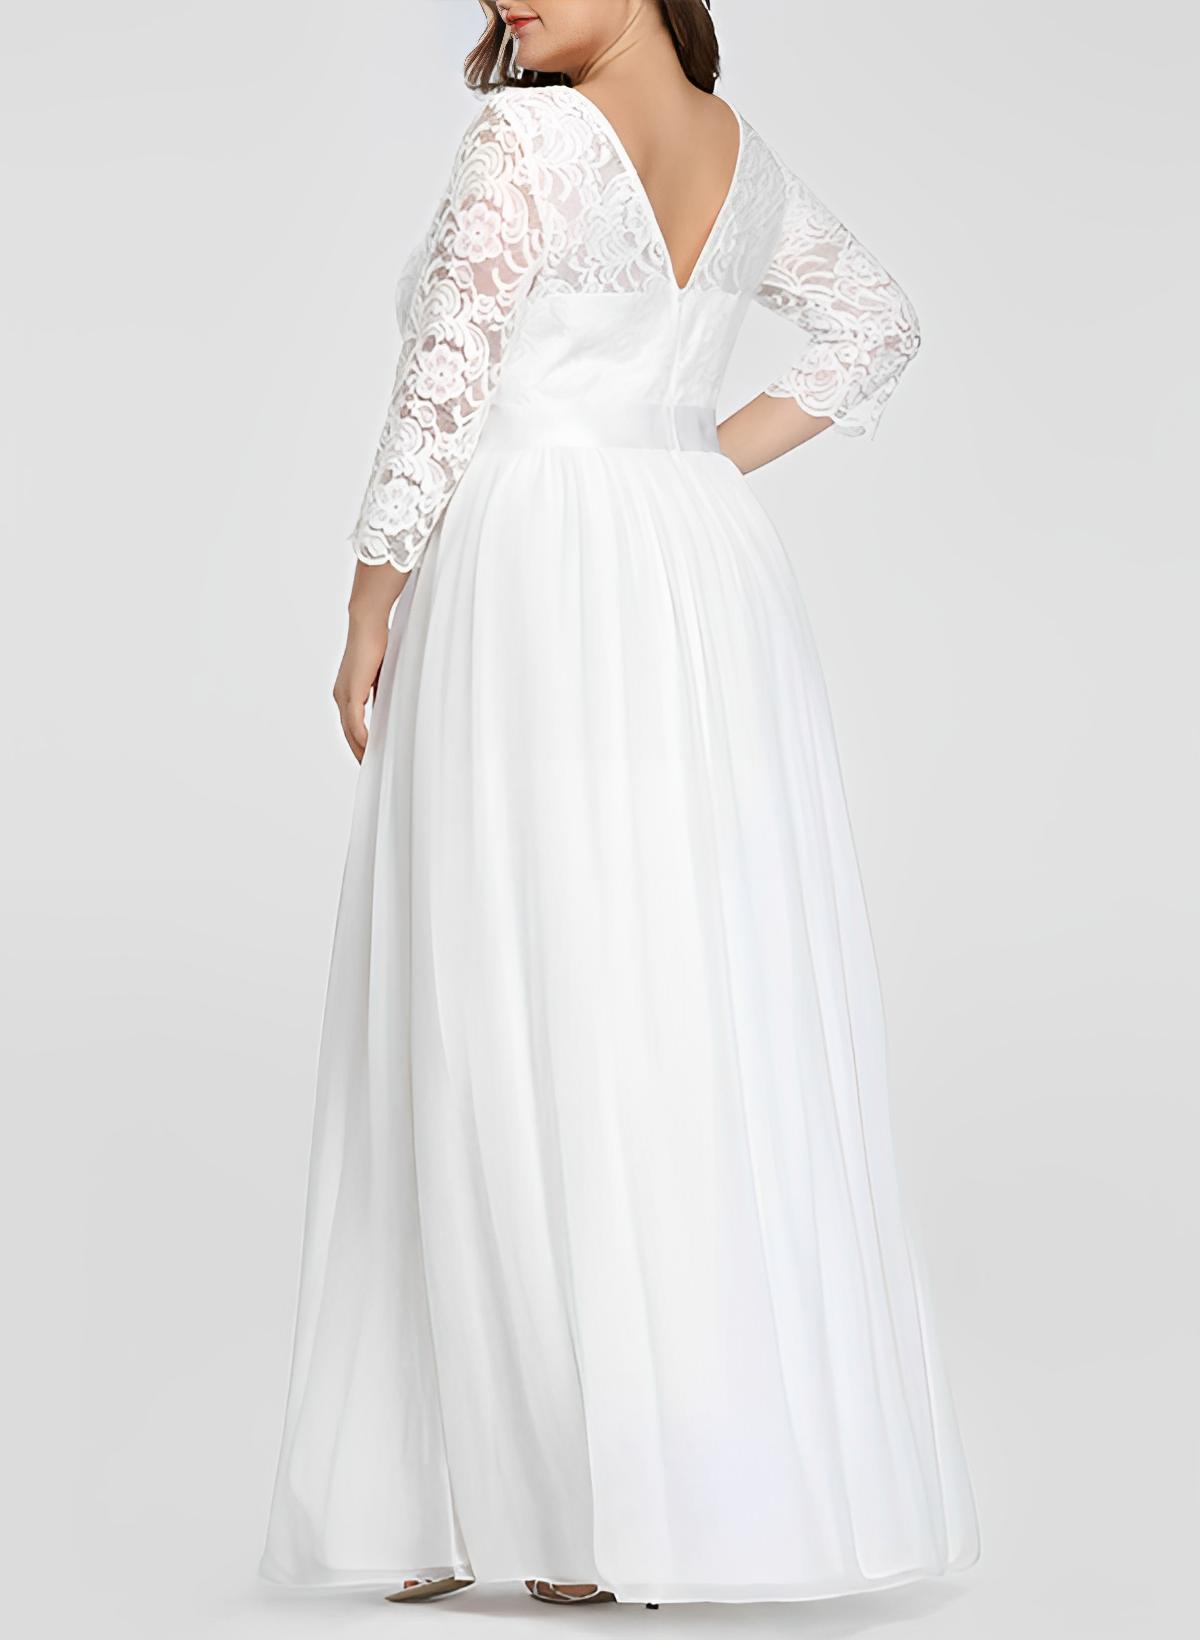 Plus Size Wedding Dresses With A-Line Floor-Length 3/4 Length Sleeves Lace Bridal Gowns